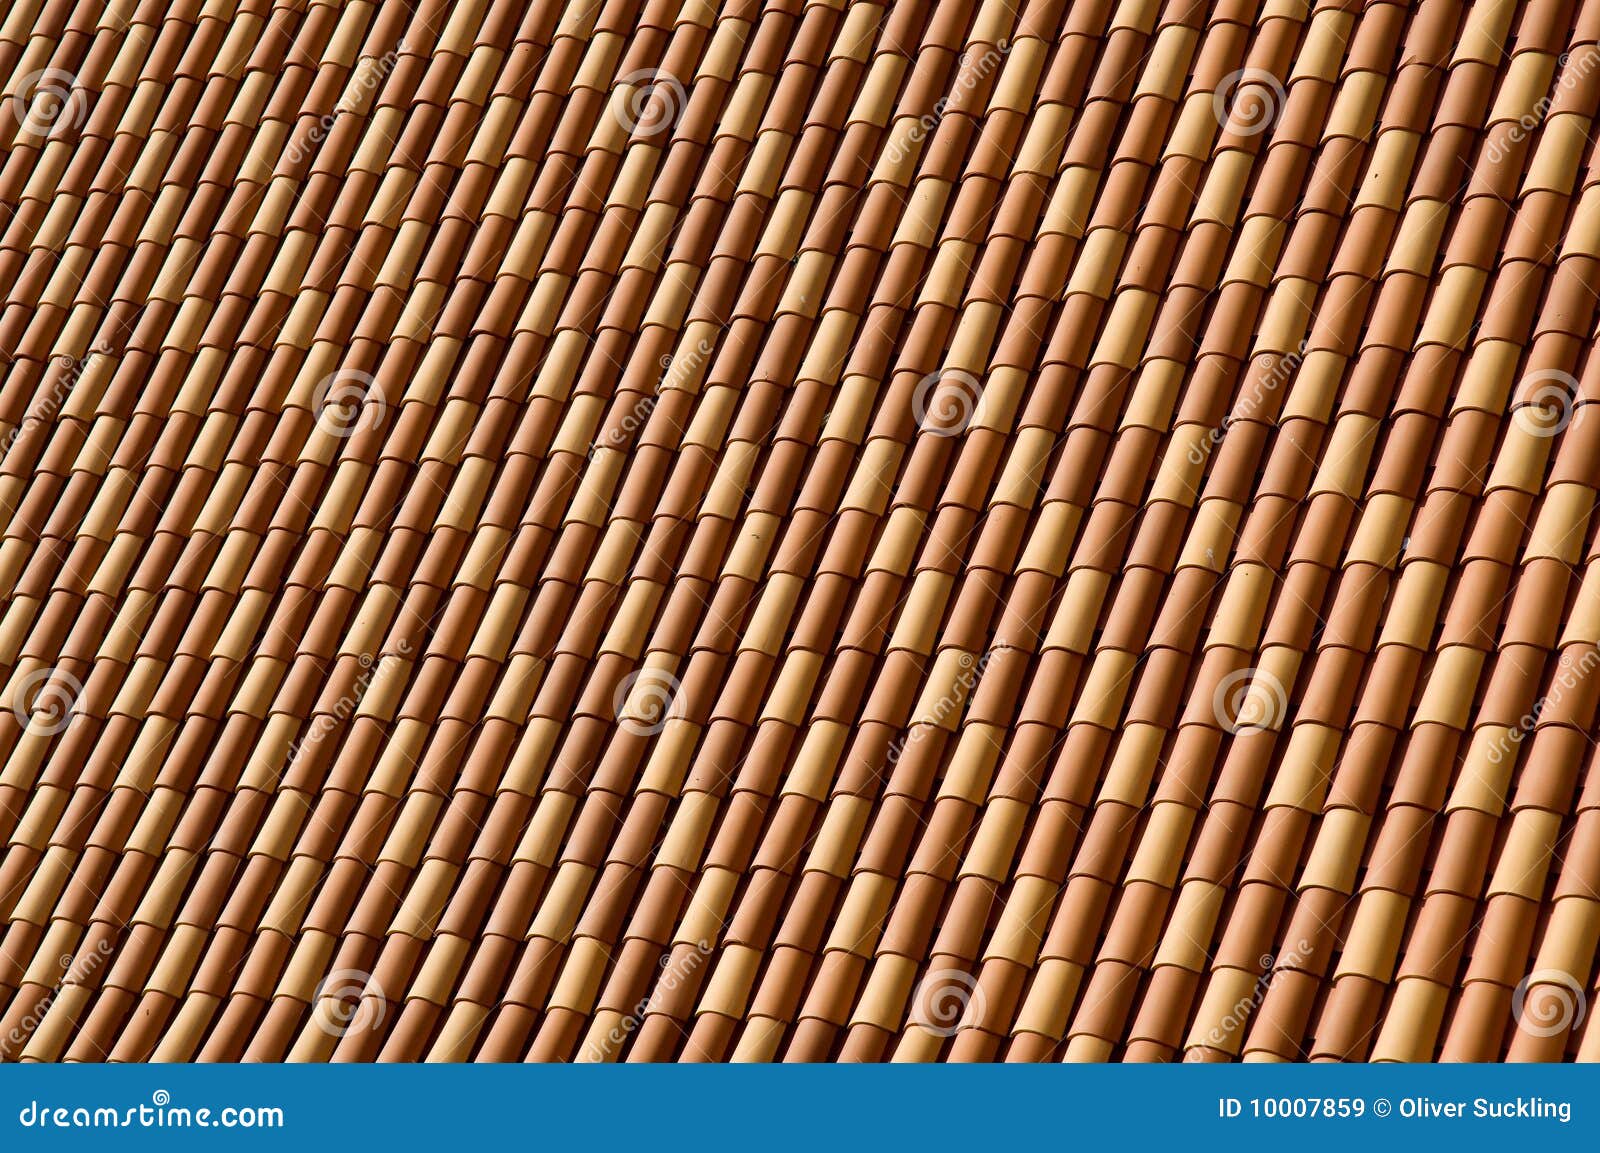 Terracotta roof tiles stock image. Image of abstractly - 10007859